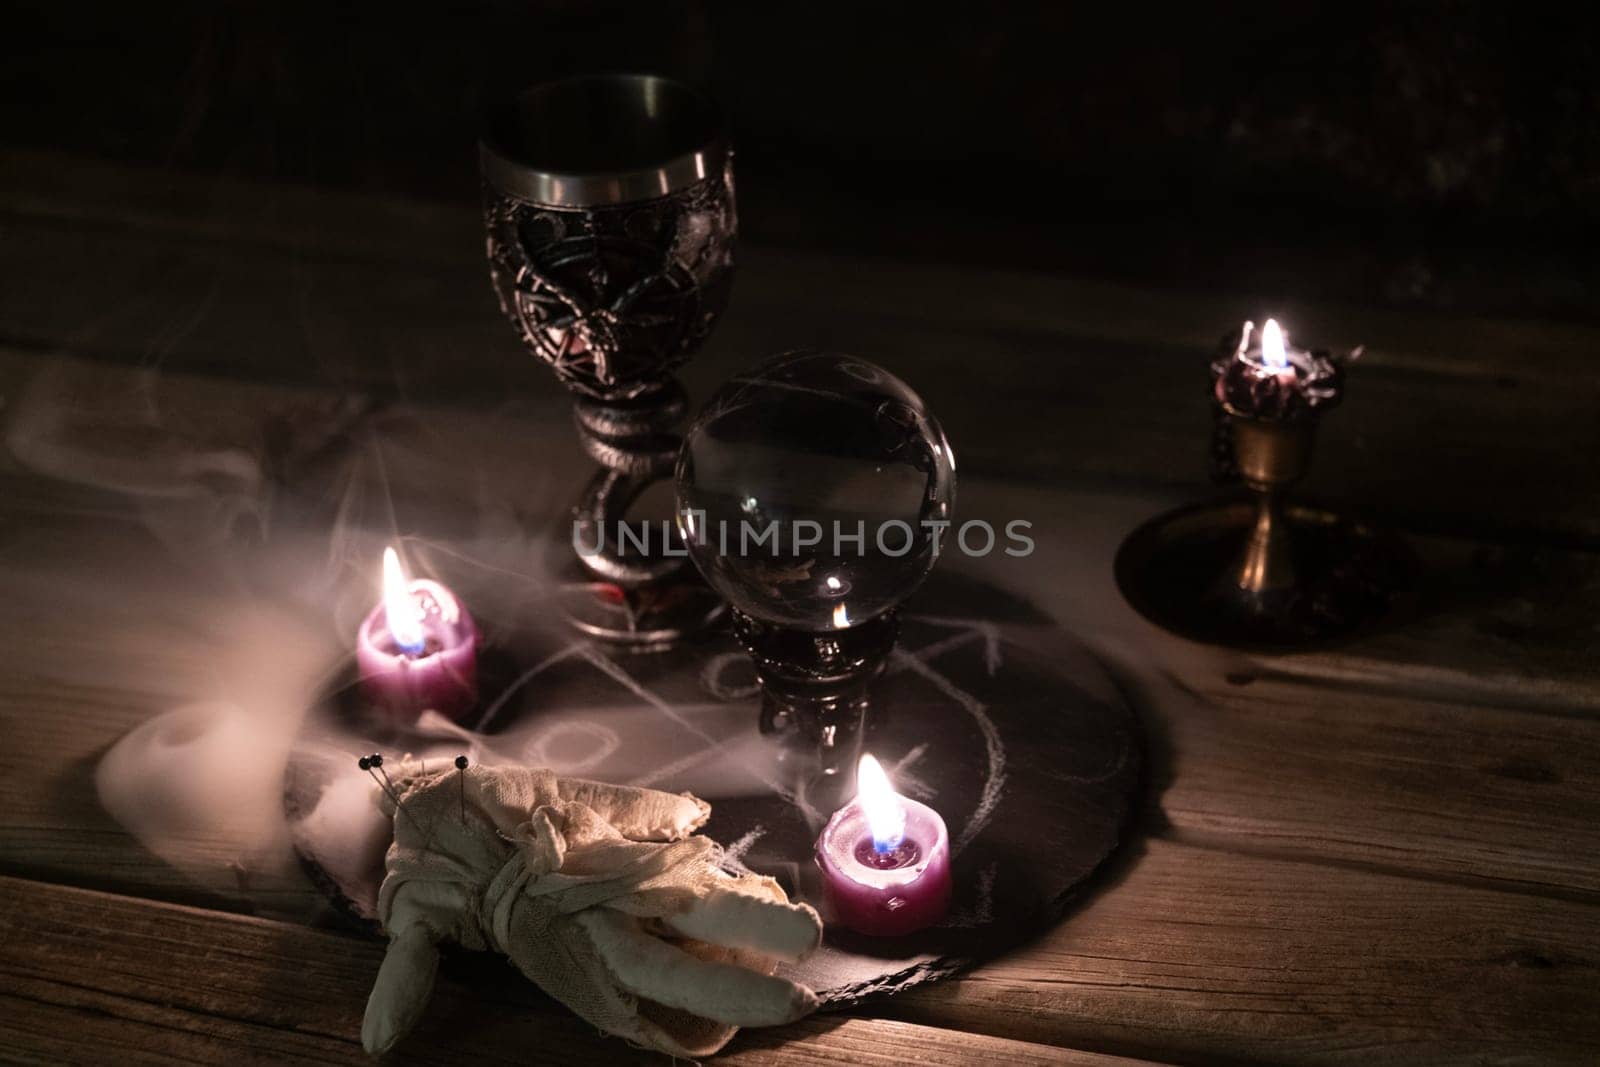 Mysterious Occult Ritual Setup with Crystal Ball and Candles. by jbruiz78